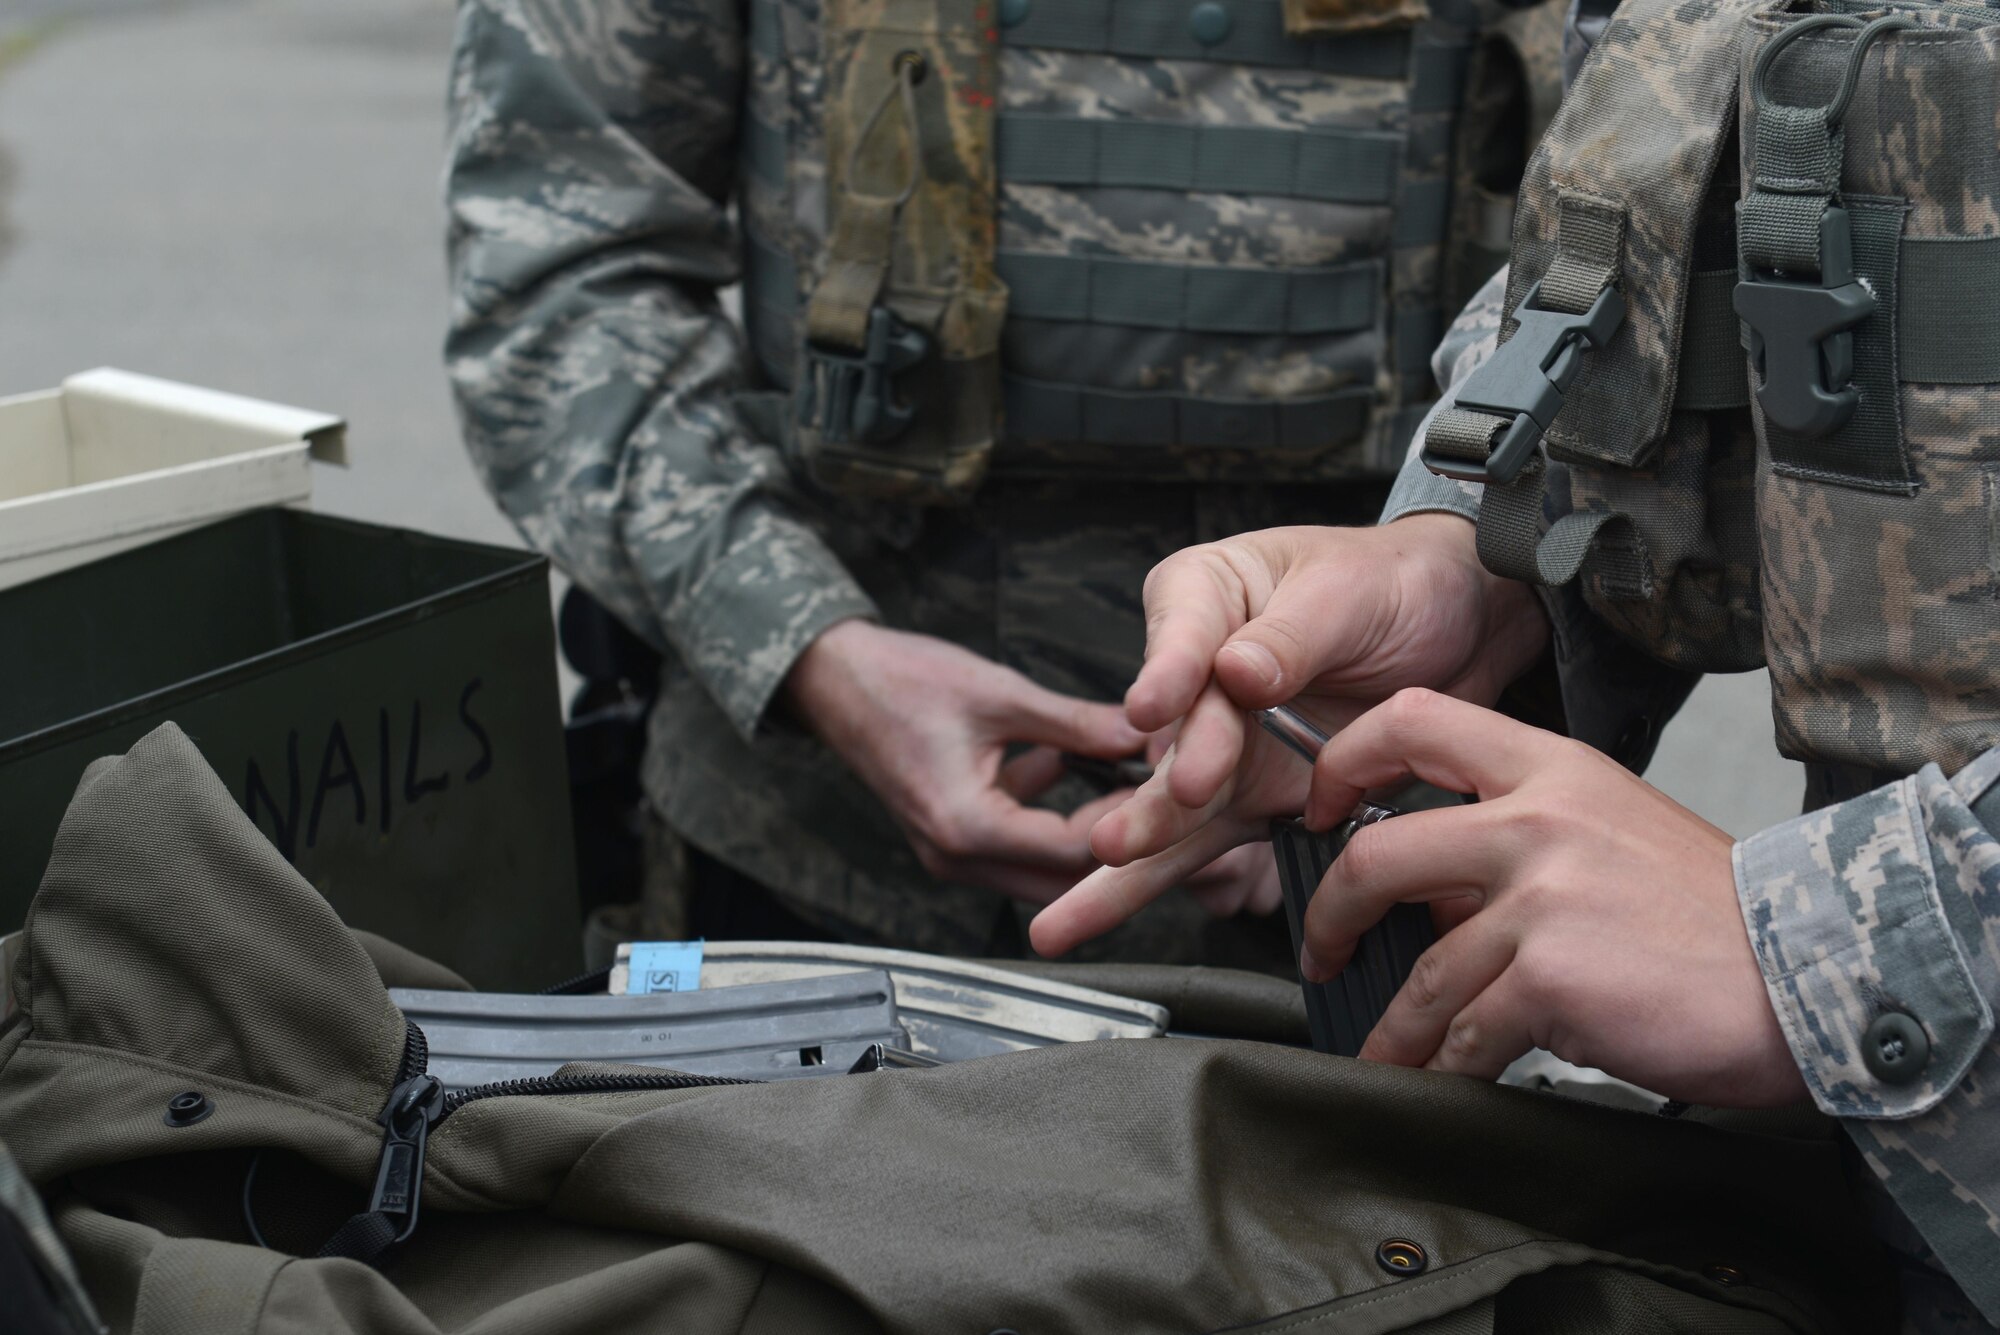 A few 673d Security Forces Squadron members load Simunition marking cartridges in preparation for active-shooter training at Joint Base Elmendorf-Richardson, Alaska, July 18, 2017. All participants were issued proper protective gear, to include a helmet, neck guard and gloves. 